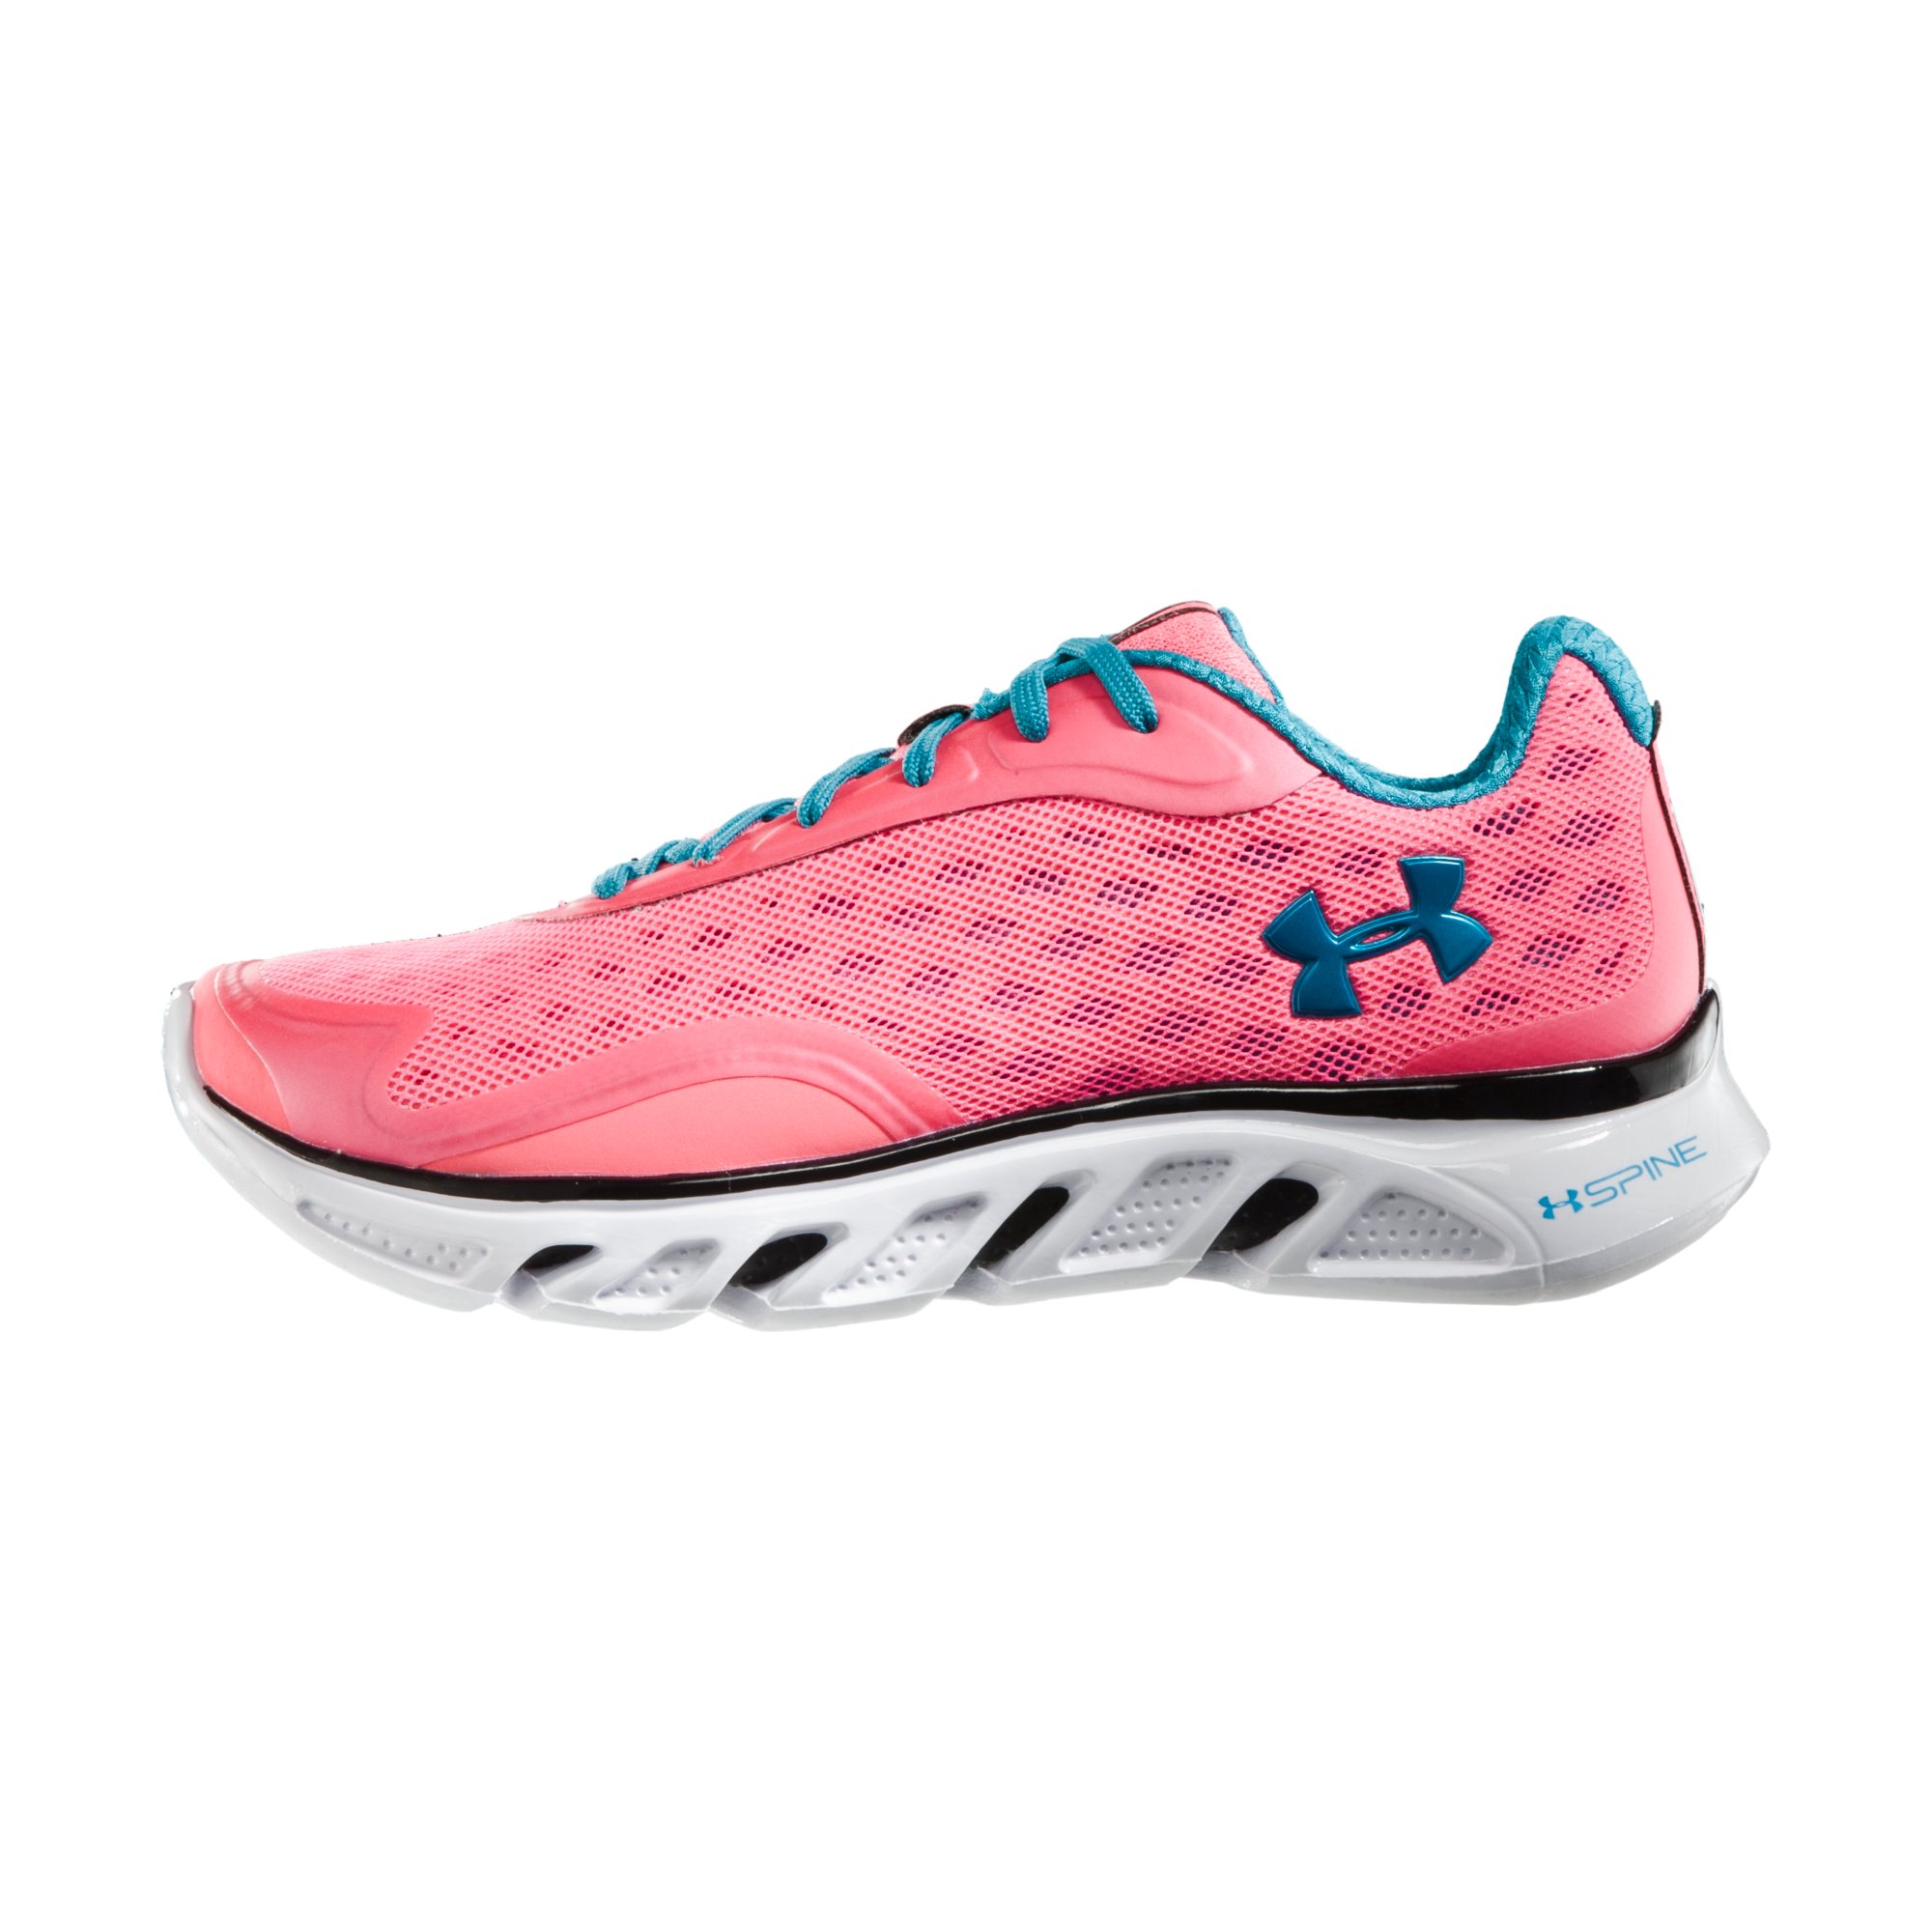 Under Armour Women's UA Spine RPM Running Shoes